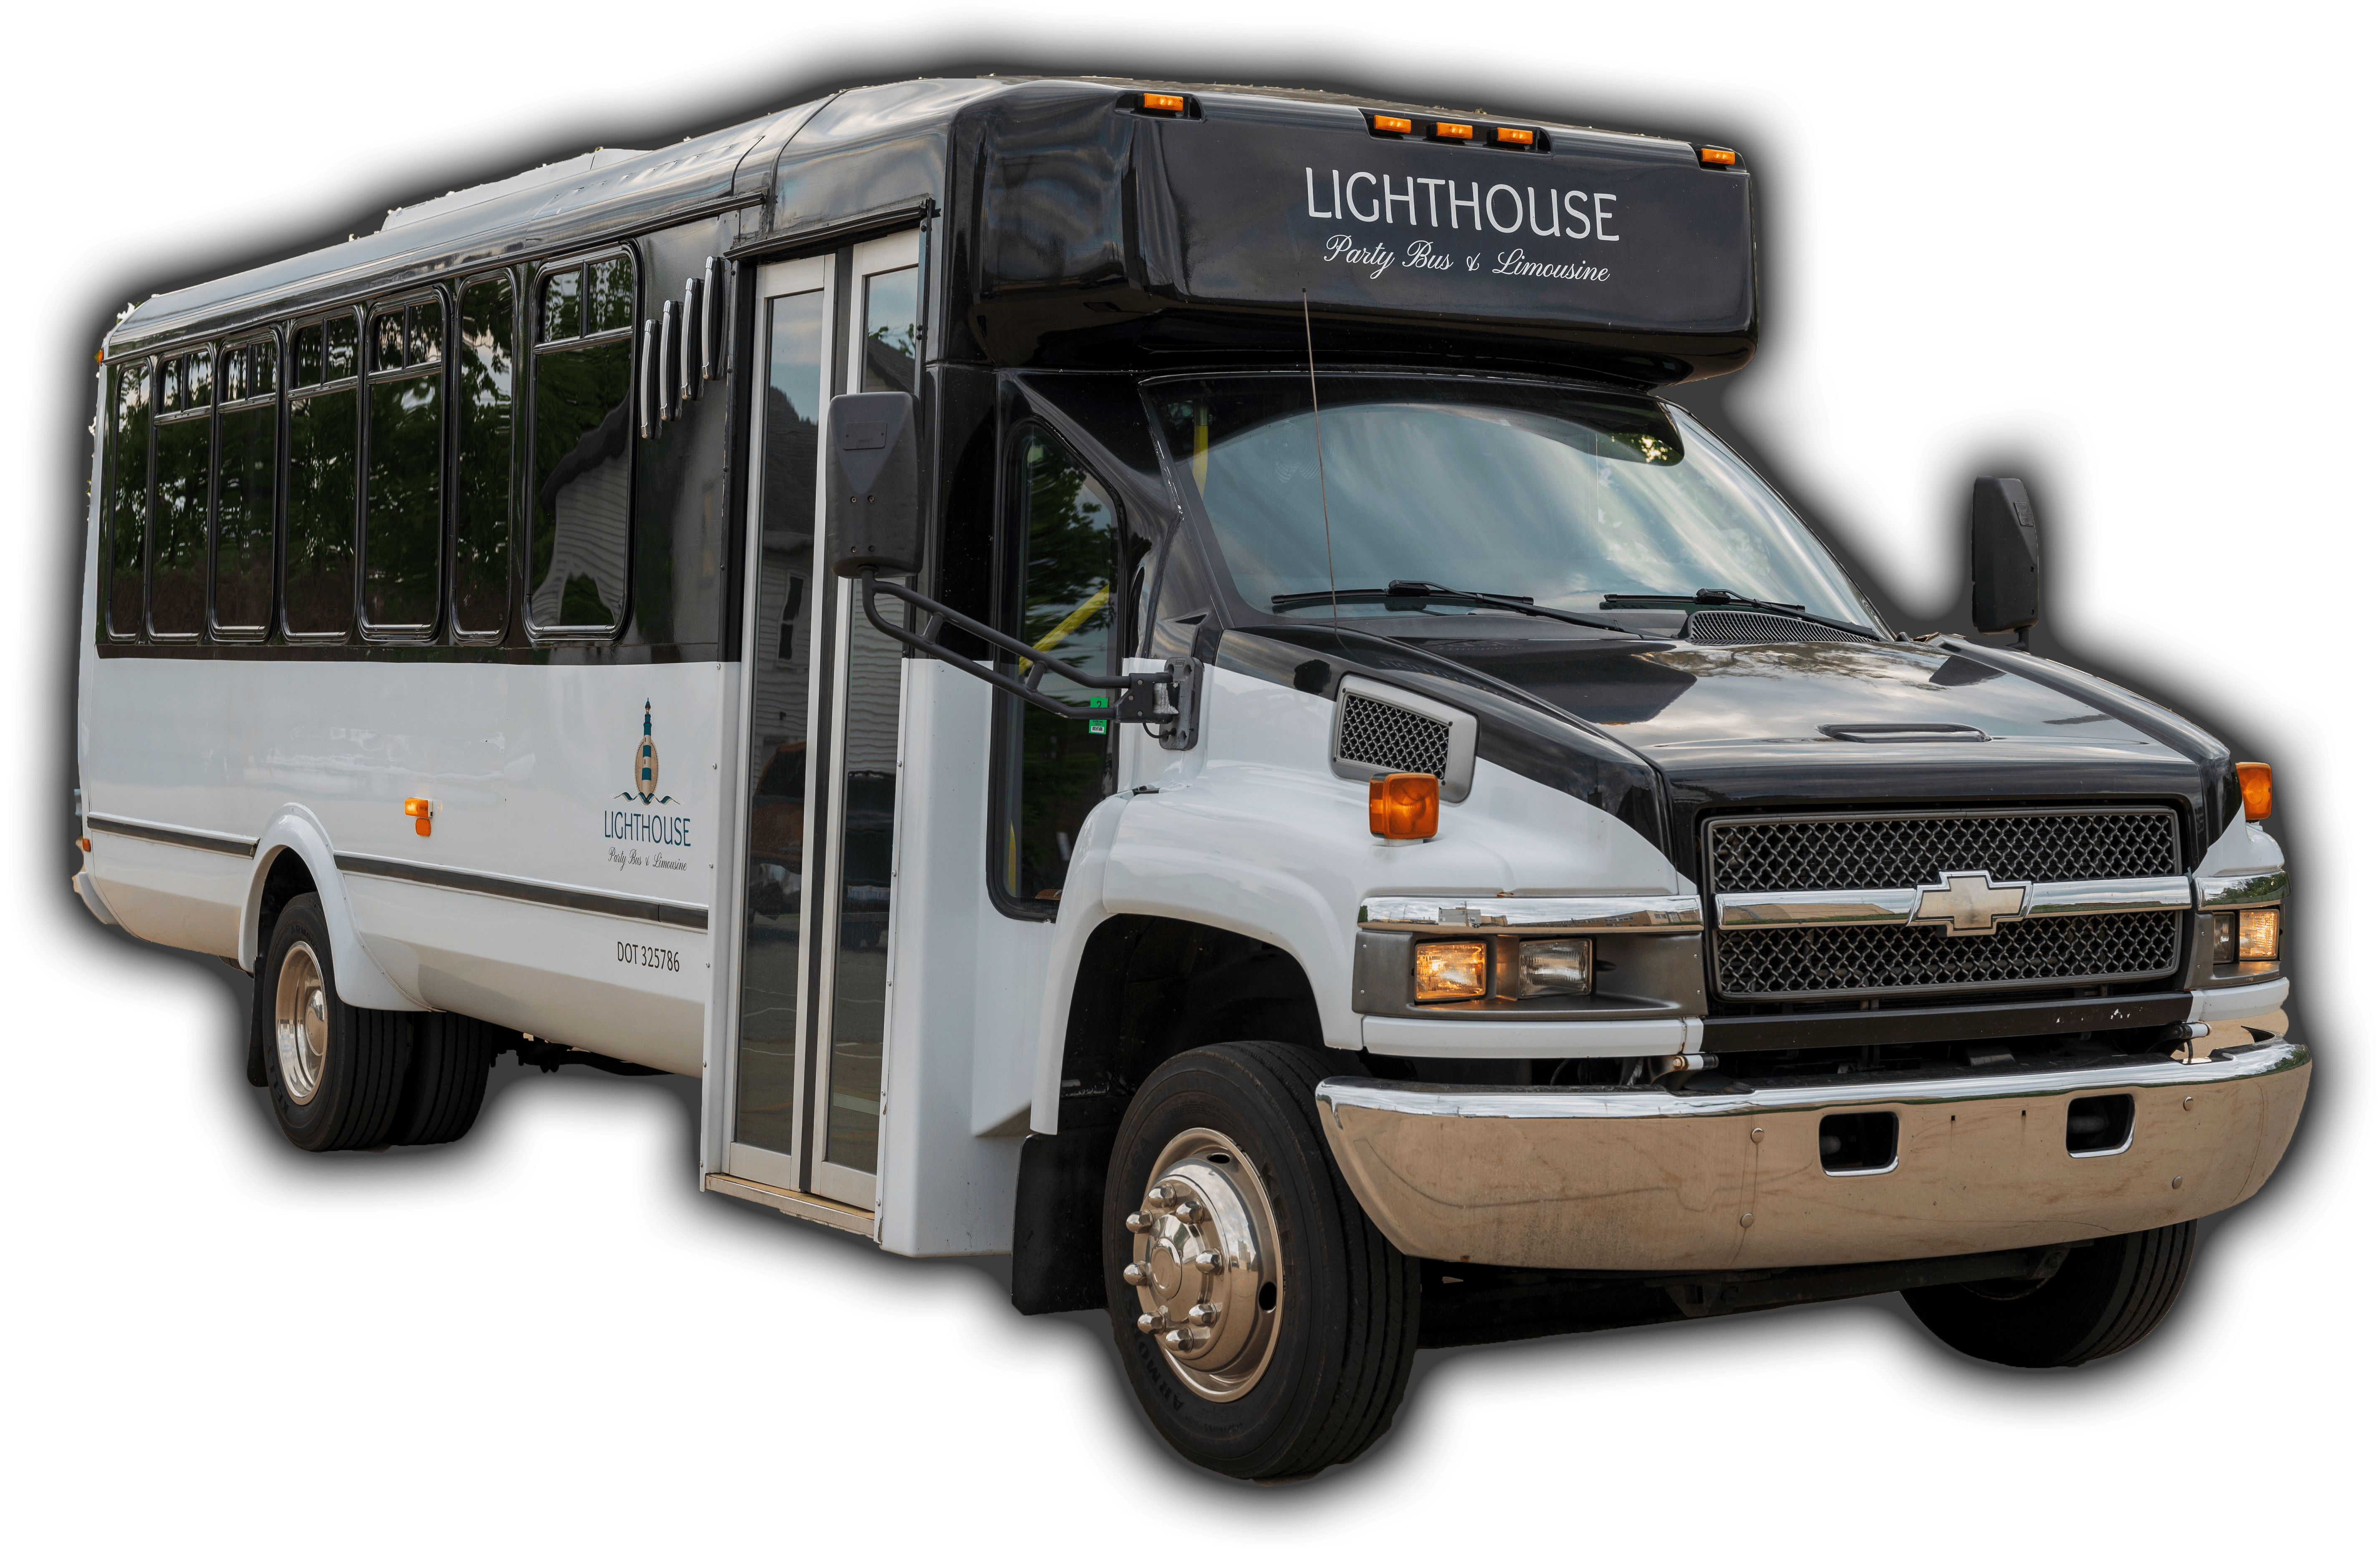 Thunder Bay Limo Bus in Michigan - Lighthouse Limousine